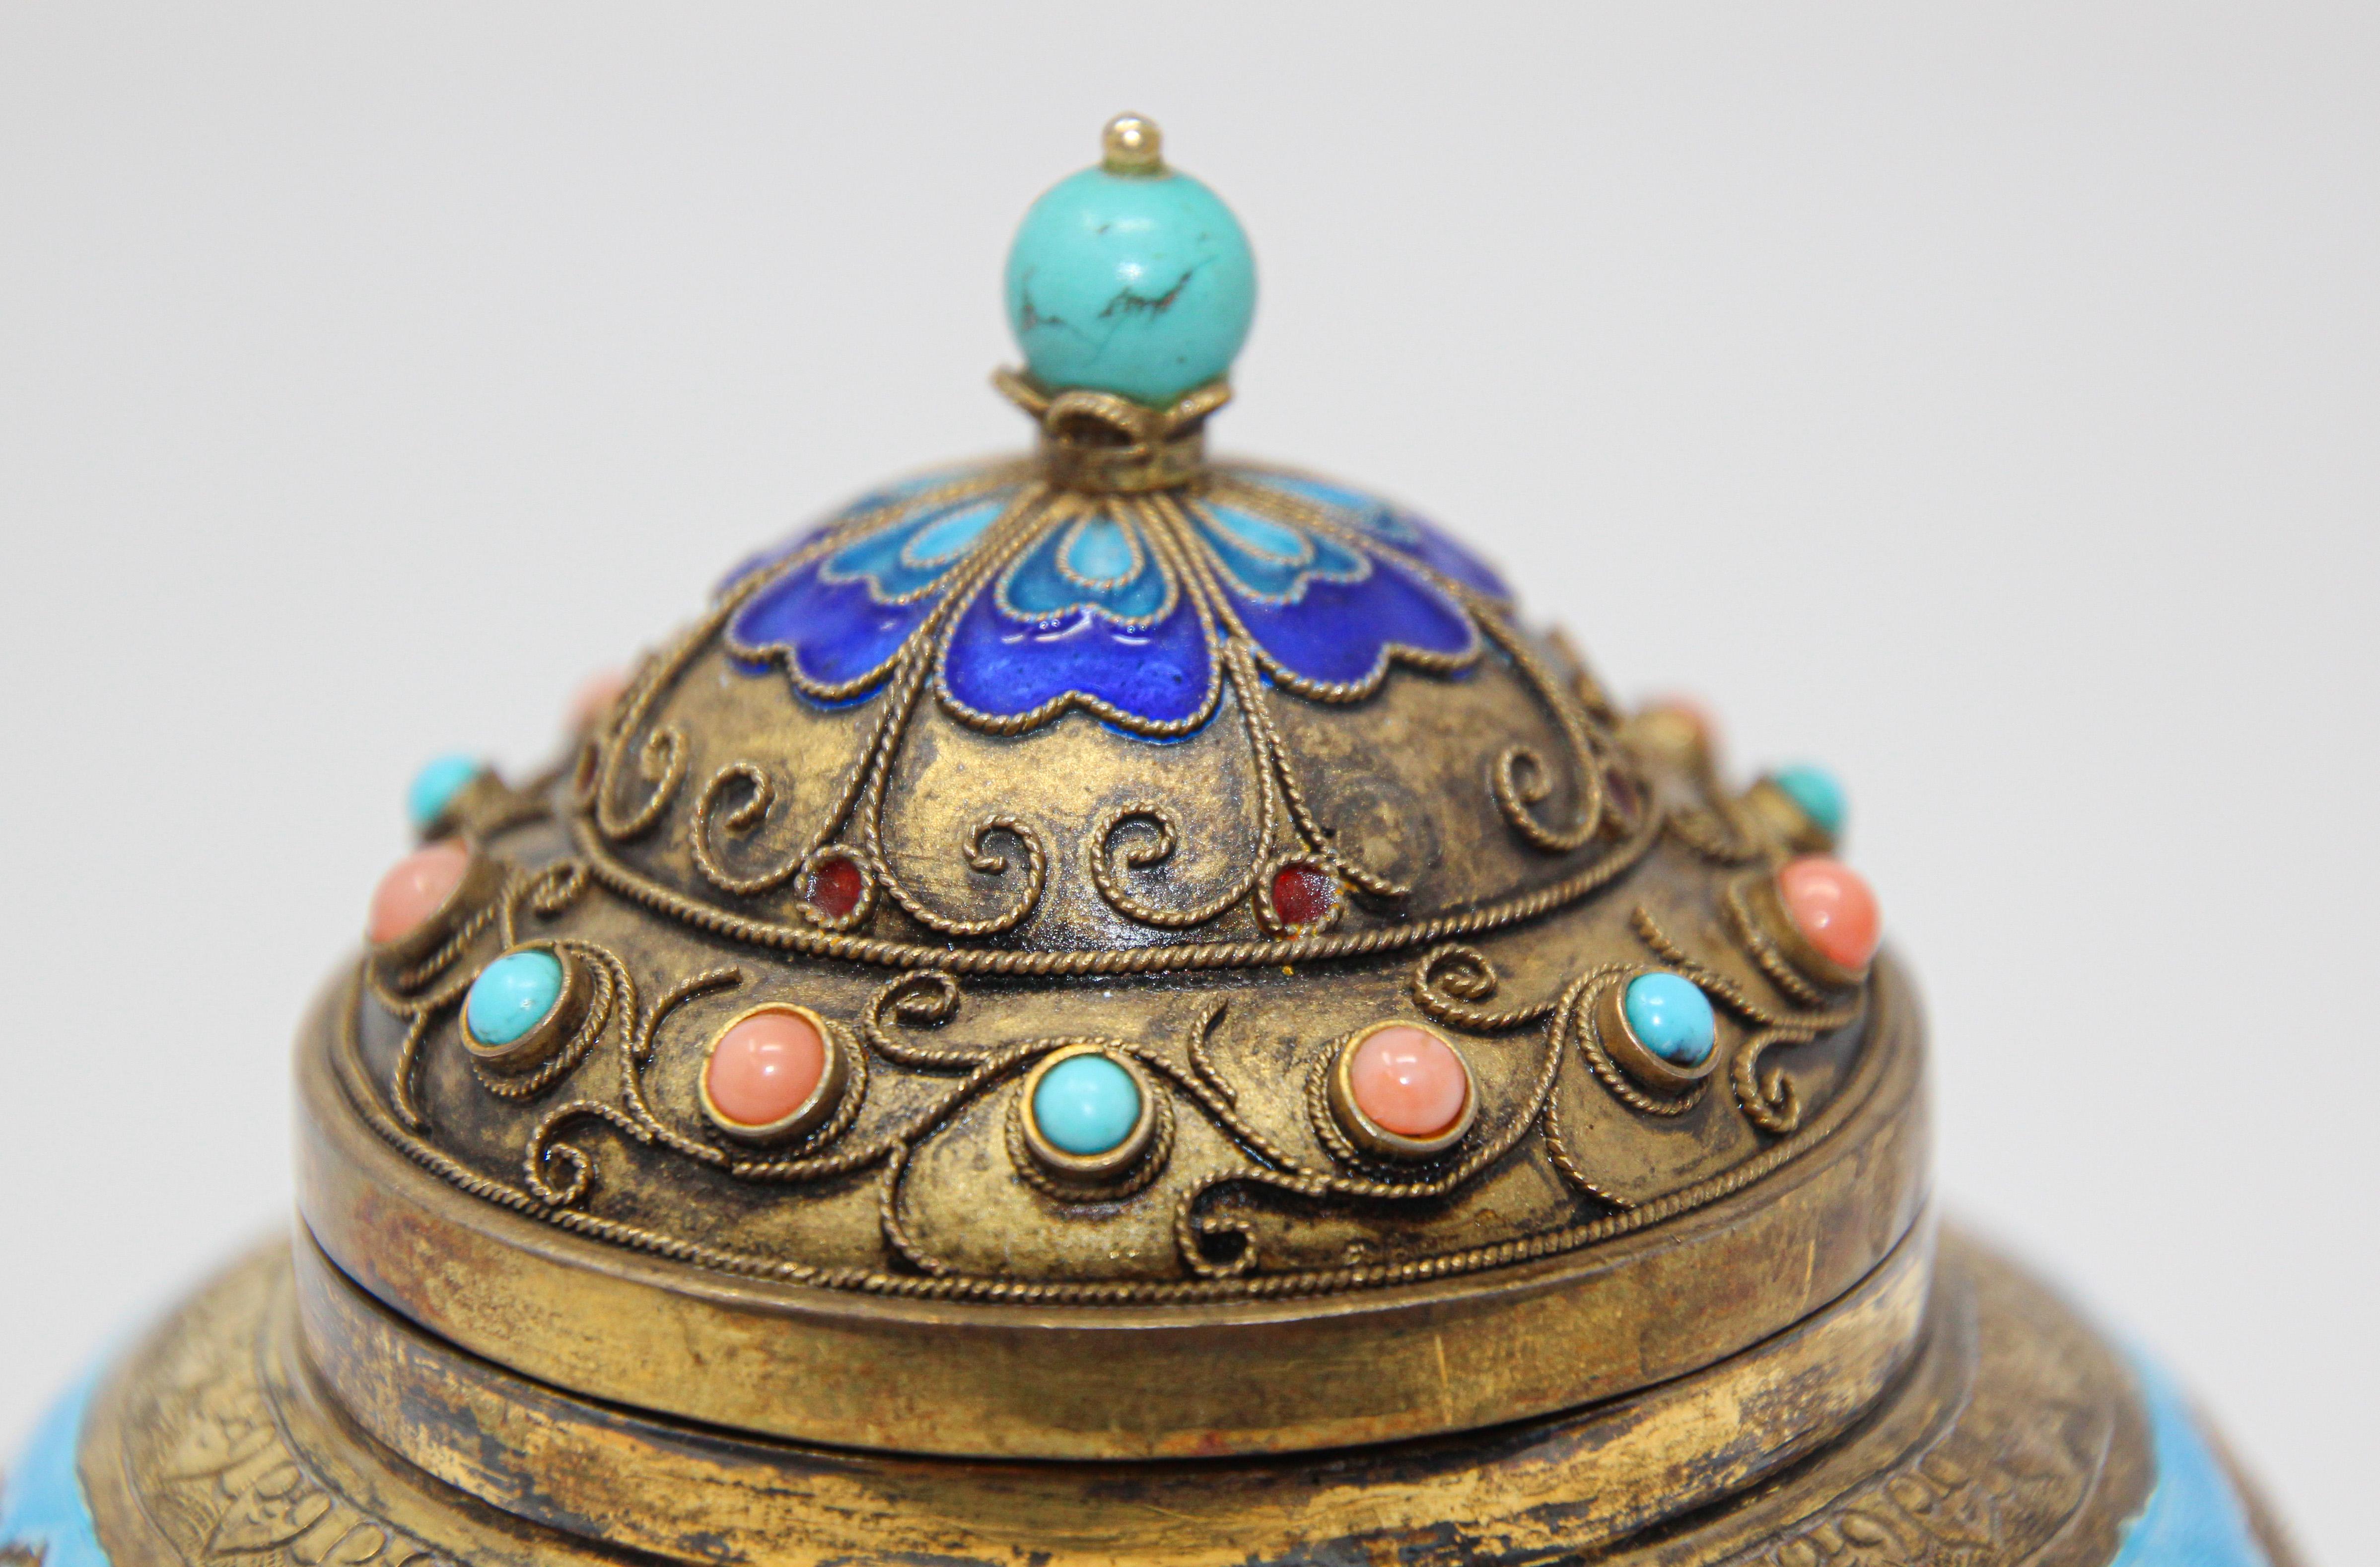 Chinese Export Brass Snuff Box with Turquoise Enamel Dragons and Beads Inlaid 4